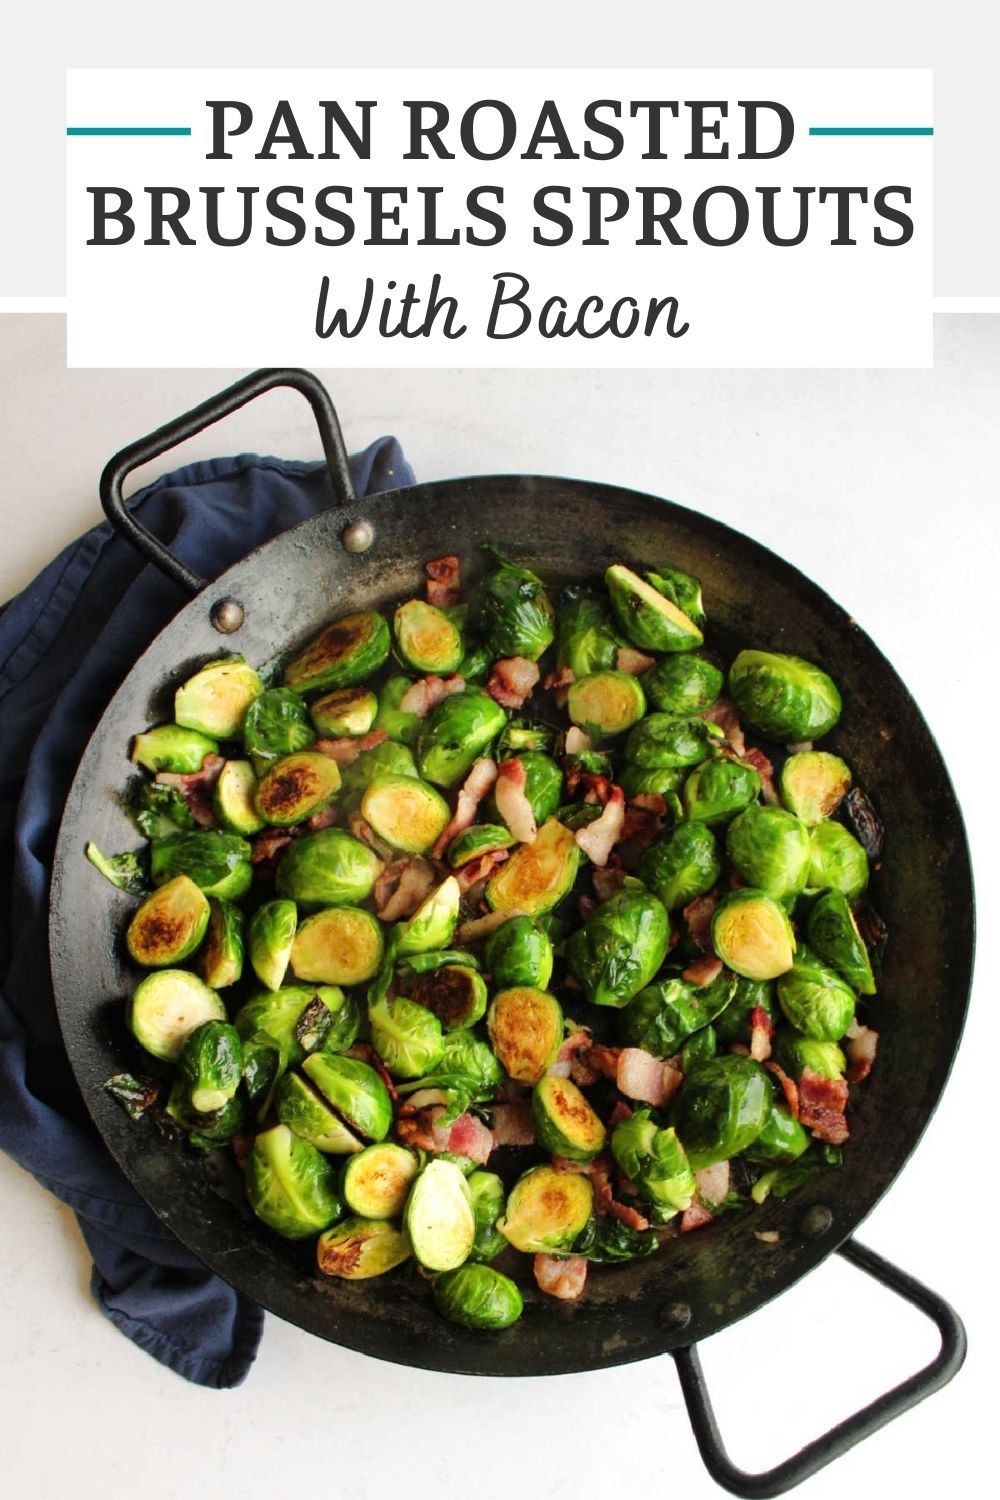 These tender pan roasted brussels sprouts have savory bacon cooked in for a tasty side dish. They are quick and easy to make and are sure to make brussels sprouts a favorite at your dinner table.